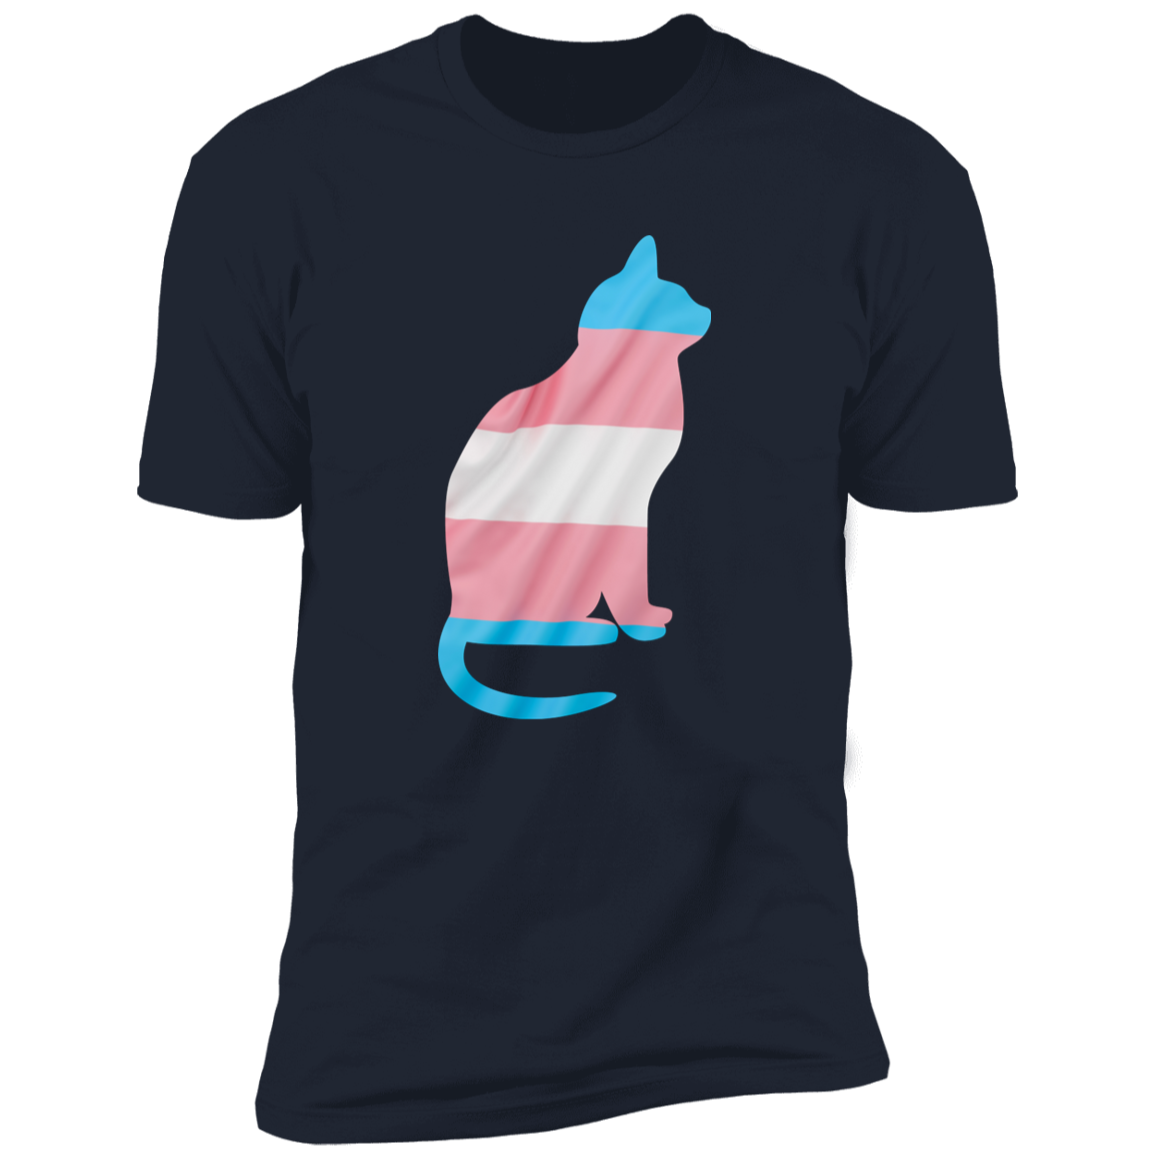 Trans Pride Cat Pride T-shirt, Trans Pride Cat Shirt for humans, in navy blue